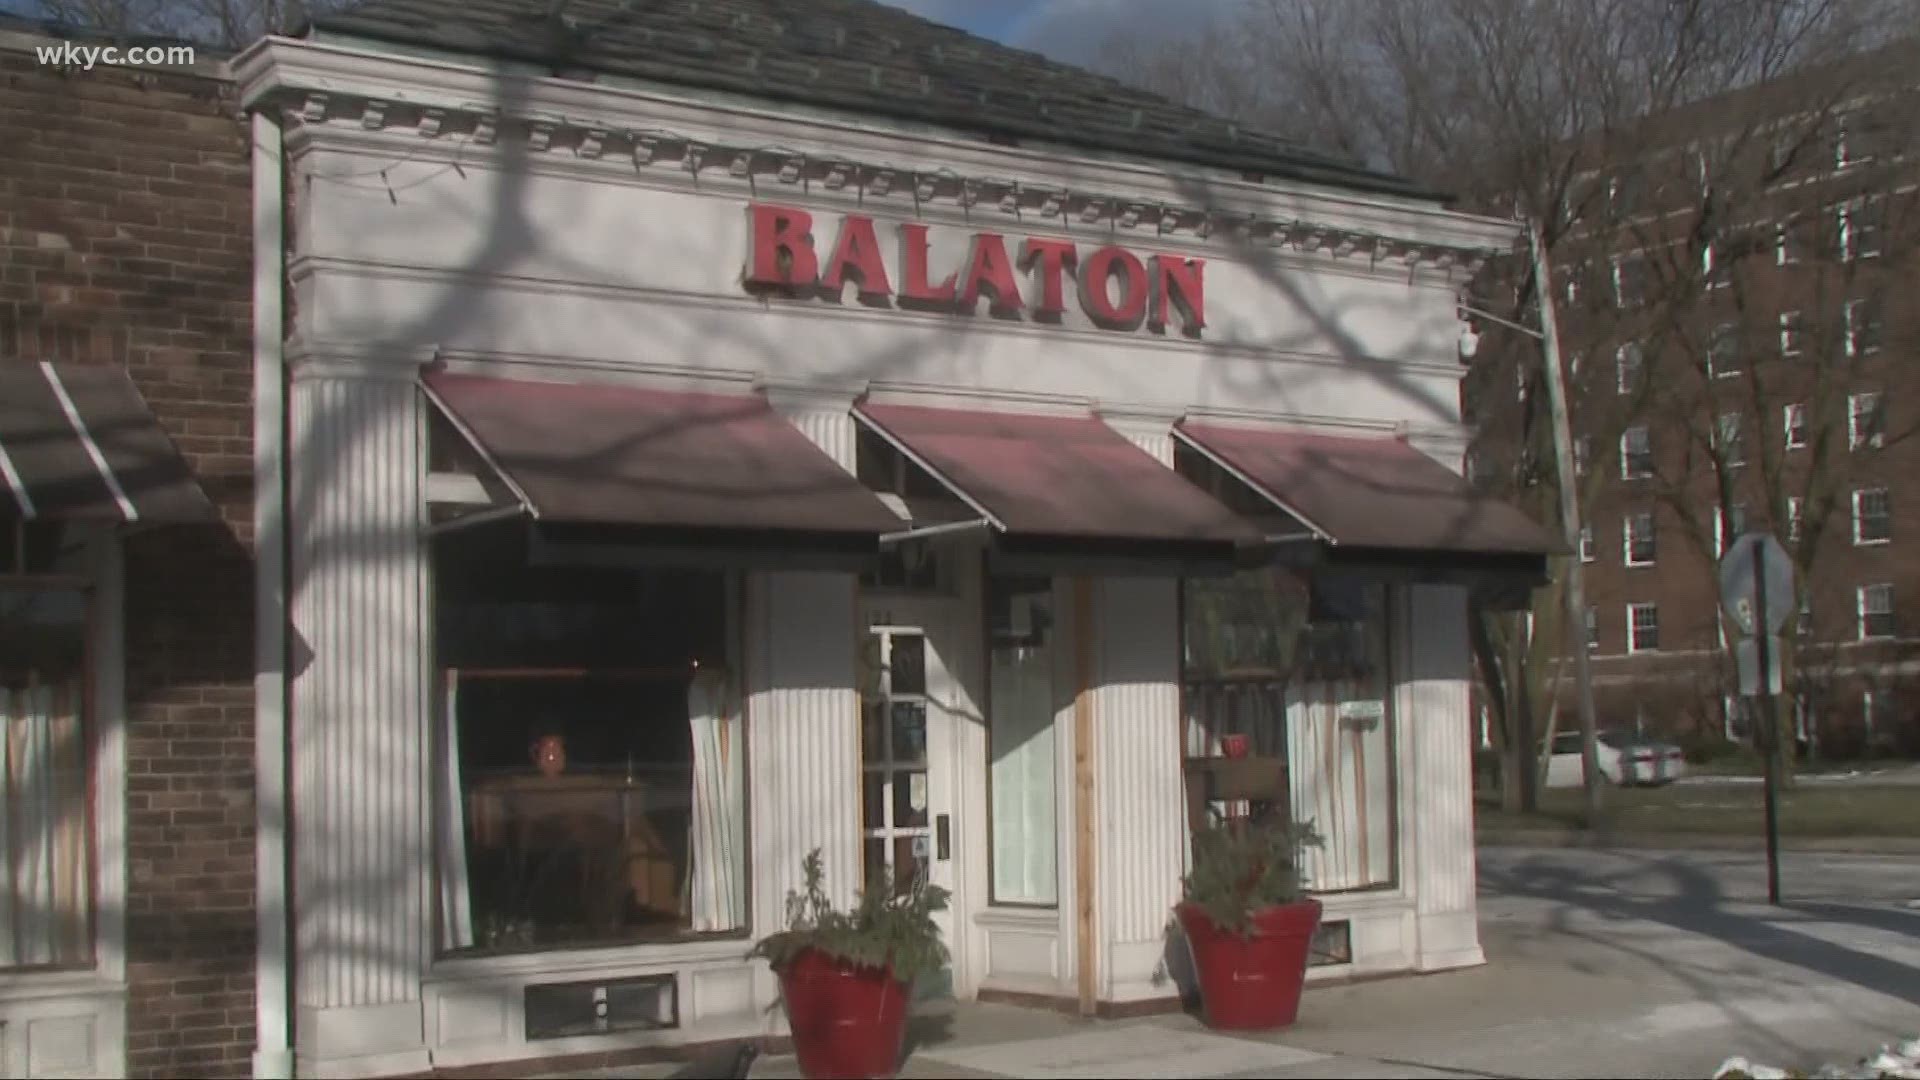 The effort to save Balaton comes amid the possible sale of Shaker Square. Andrew Horansky has more.